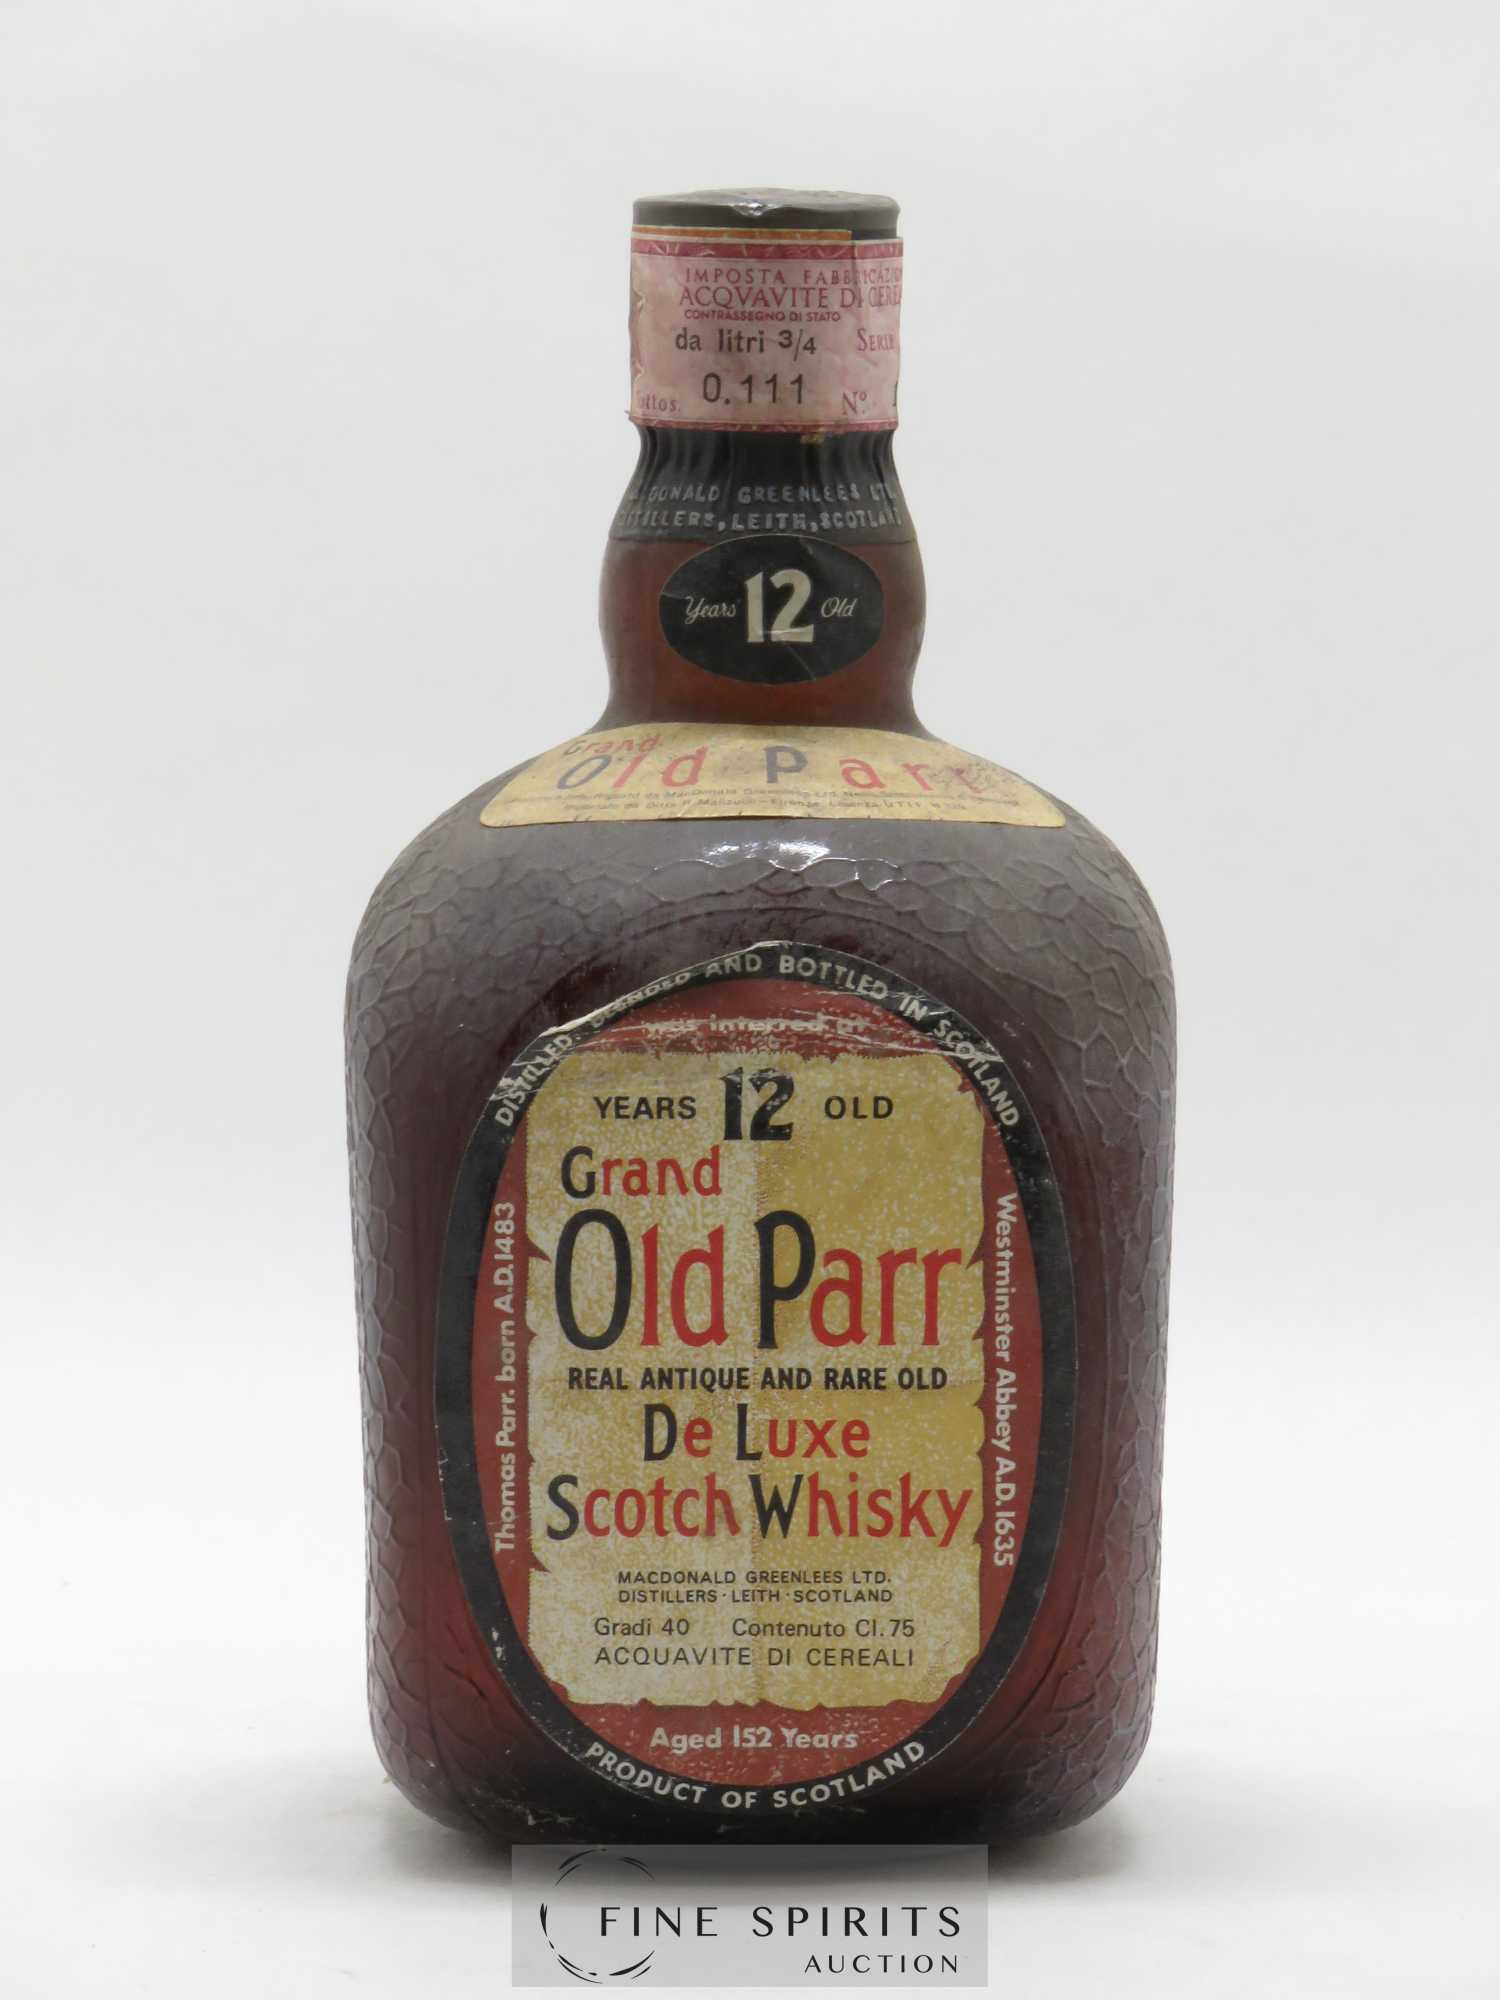 Old grand's. Old Parr виски 12 лет цена.